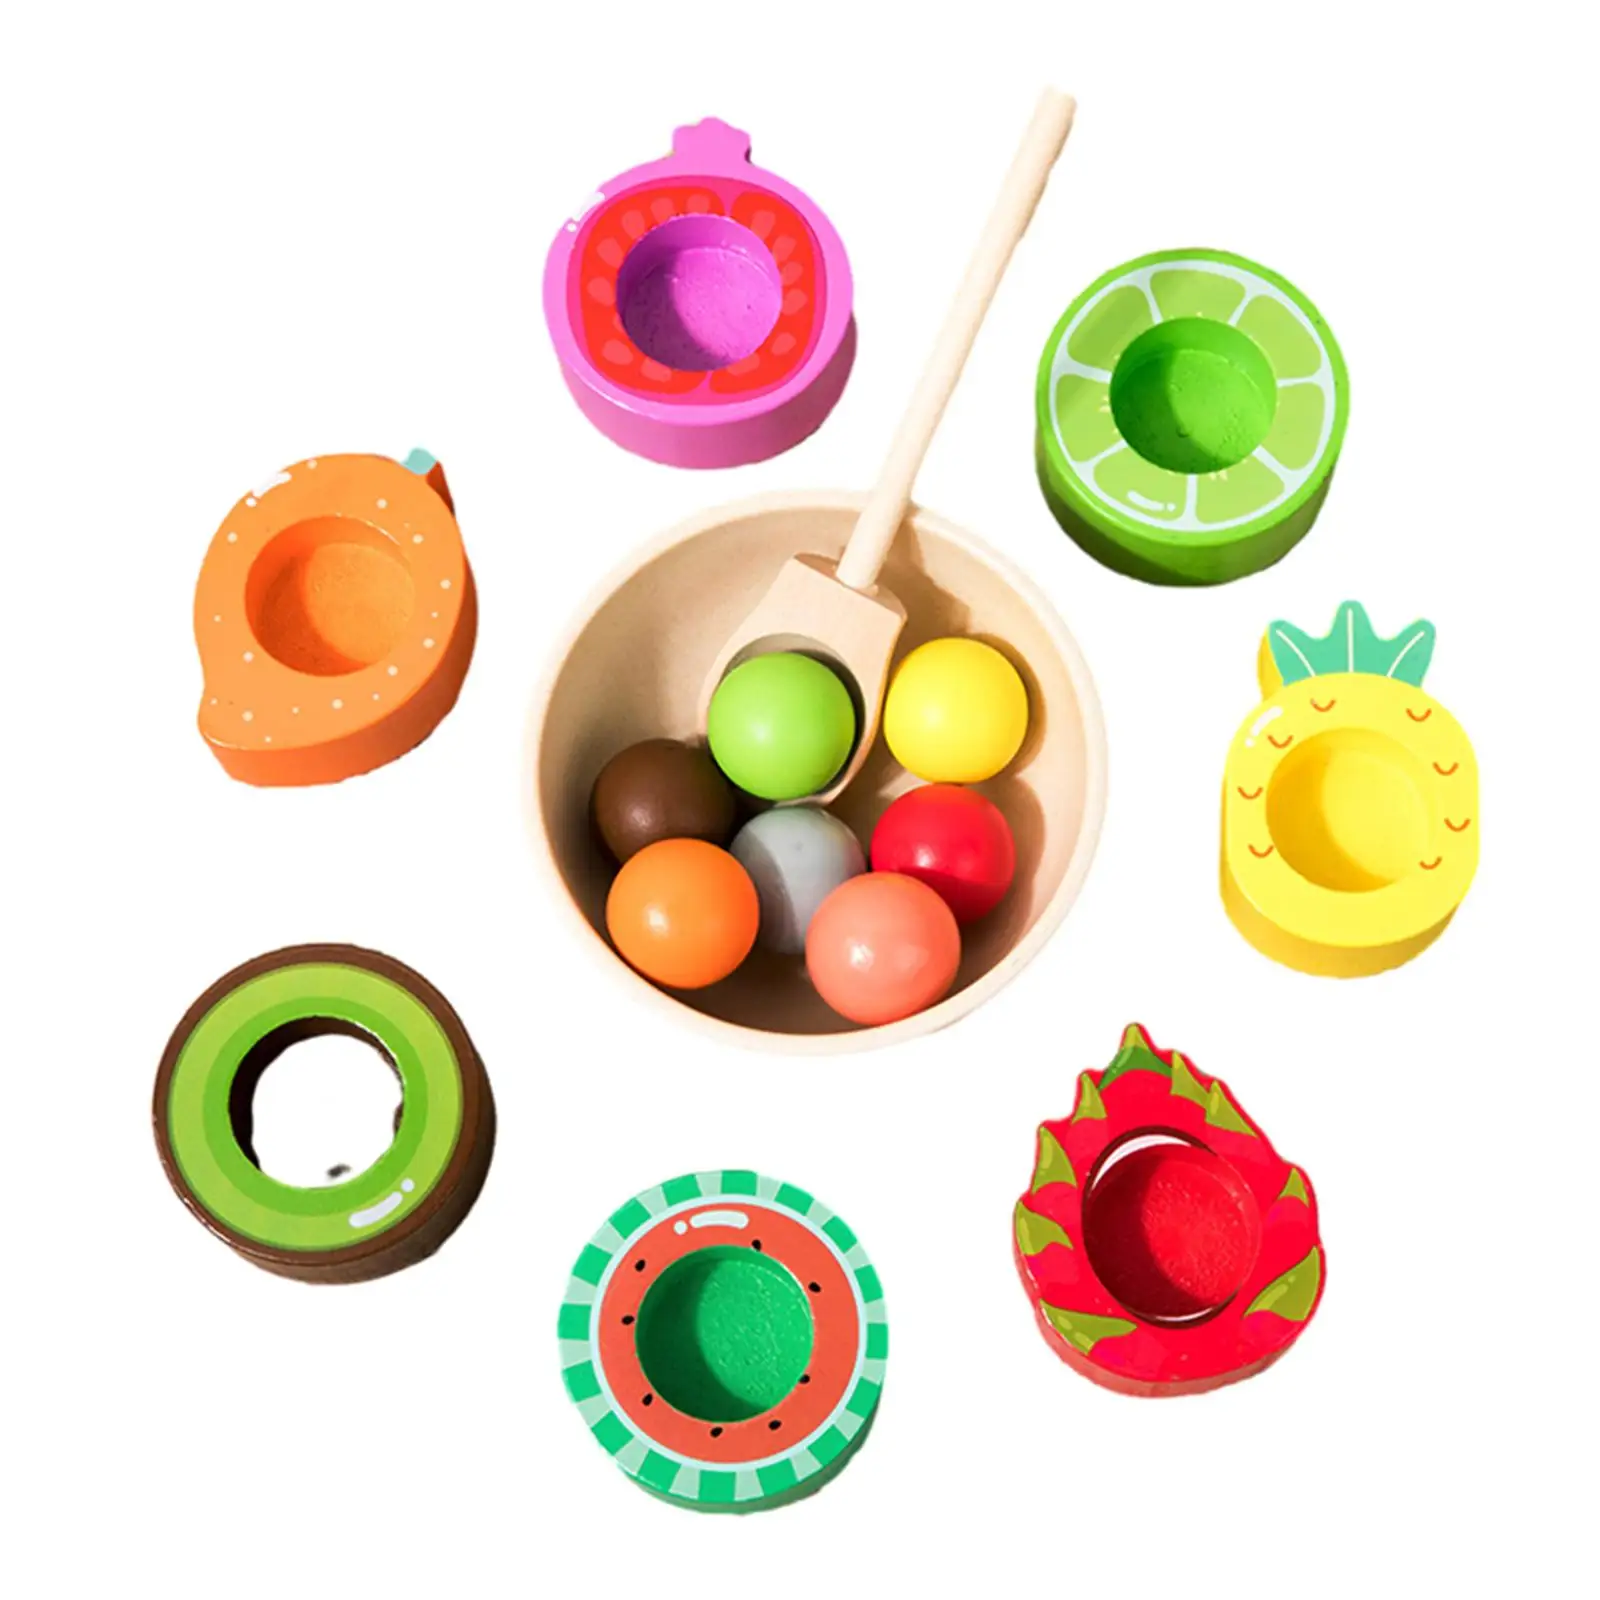 Montessori Toys Wooden Balls in Cups Preschool Sensory Toys Colorful Balls Color Sorting for Age 3 4 5 6 Boys Holiday Gifts